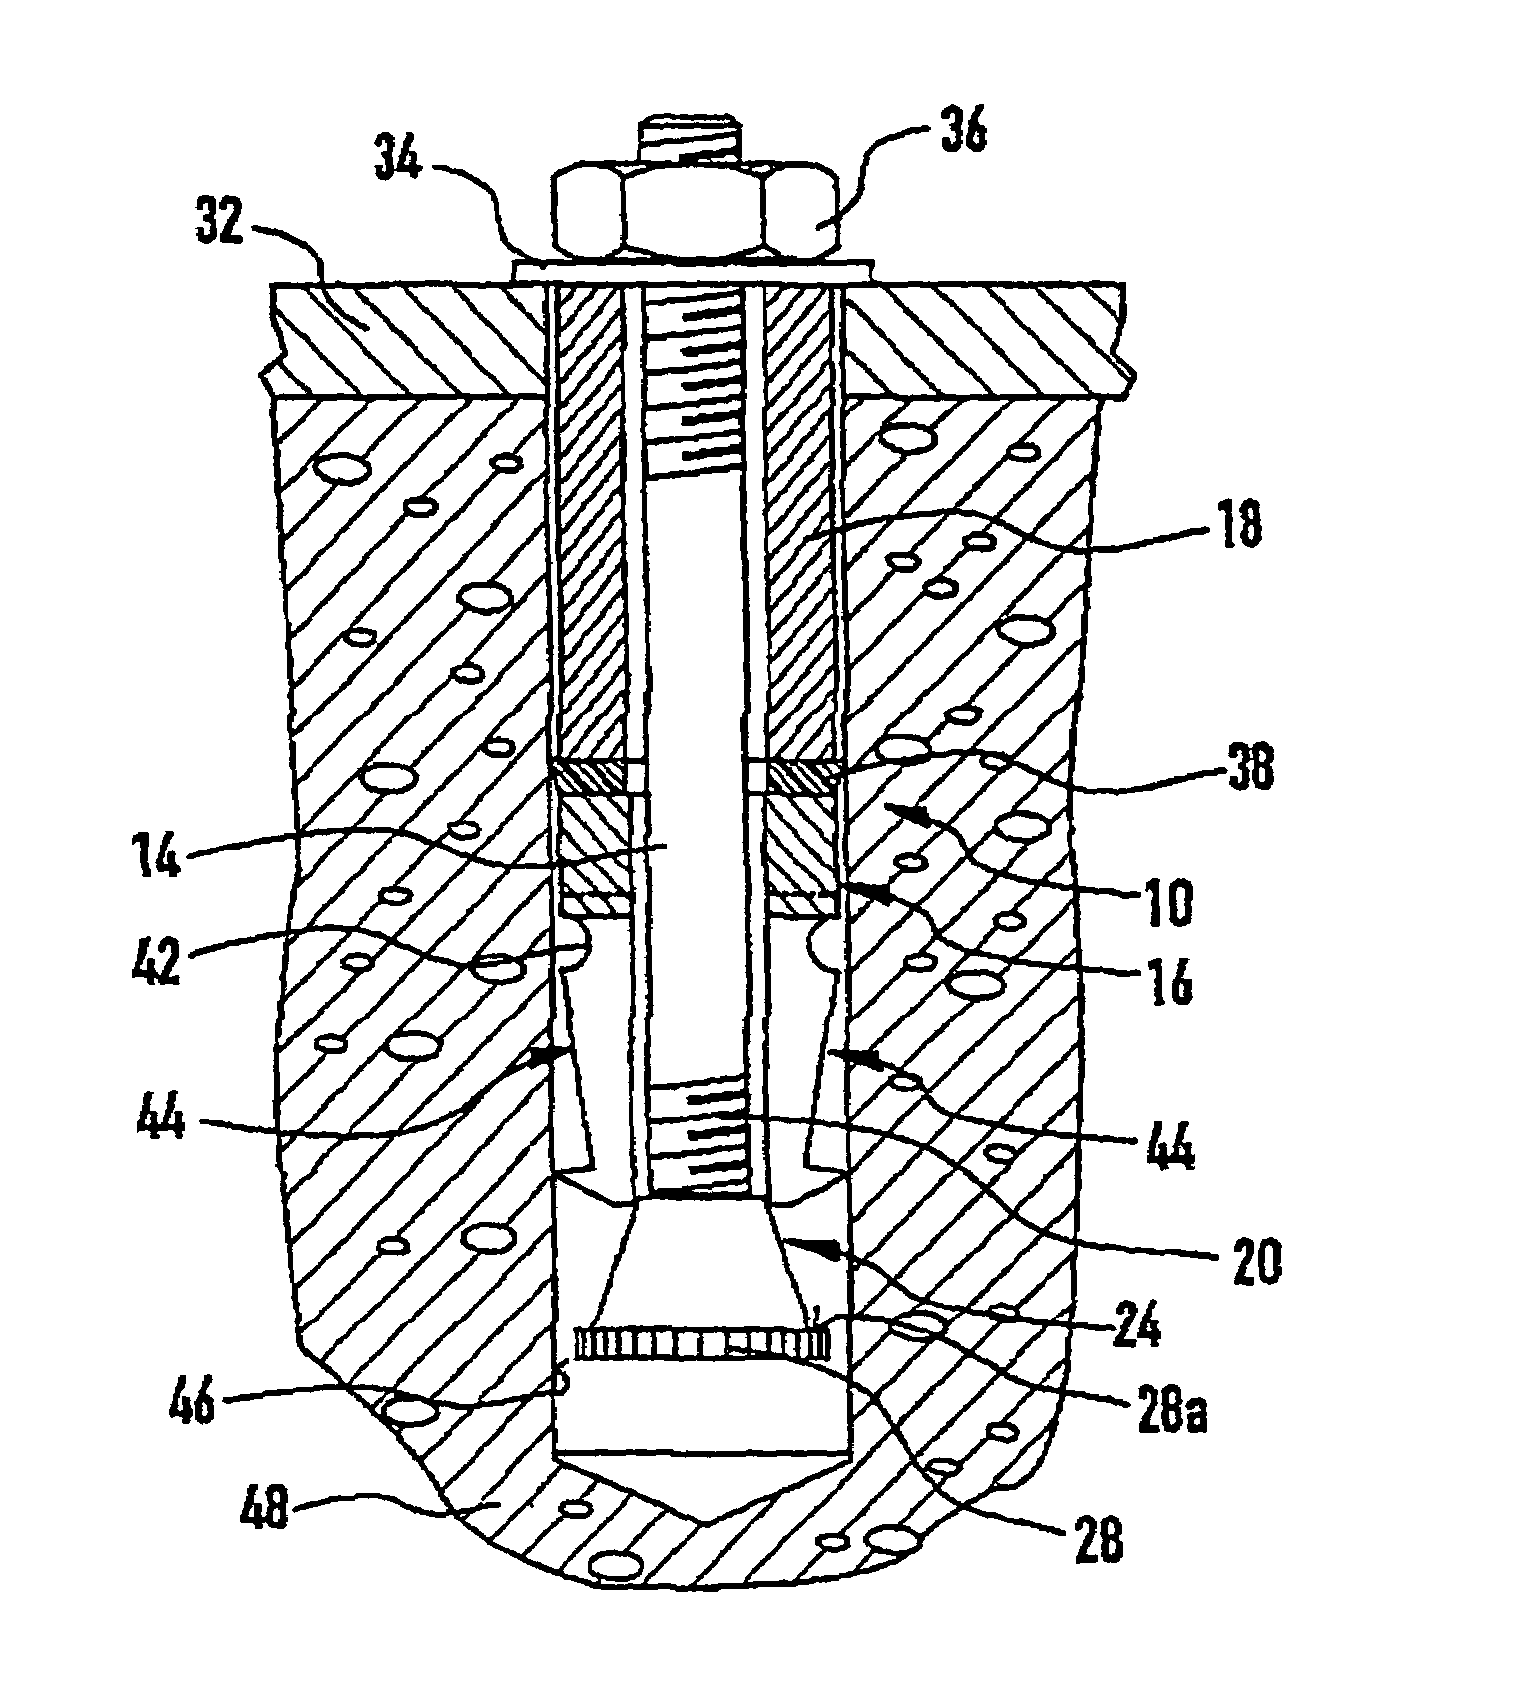 Undercut anchor element that can be mounted with positive engagement